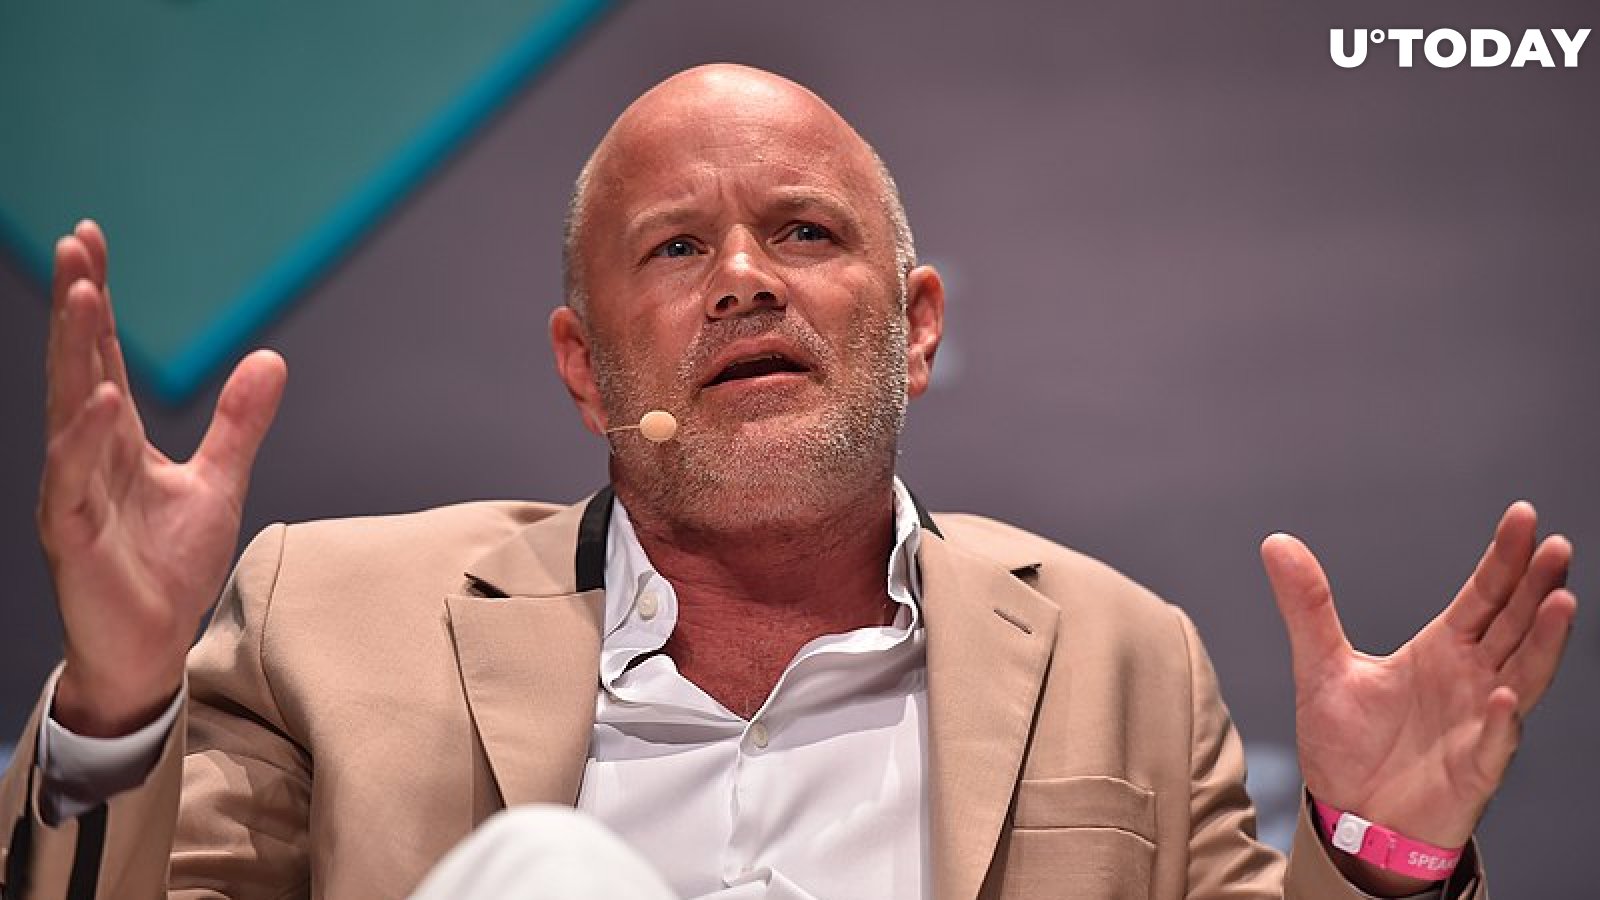 Mike Novogratz: "We Certainly See Increased Adoption in Crypto"